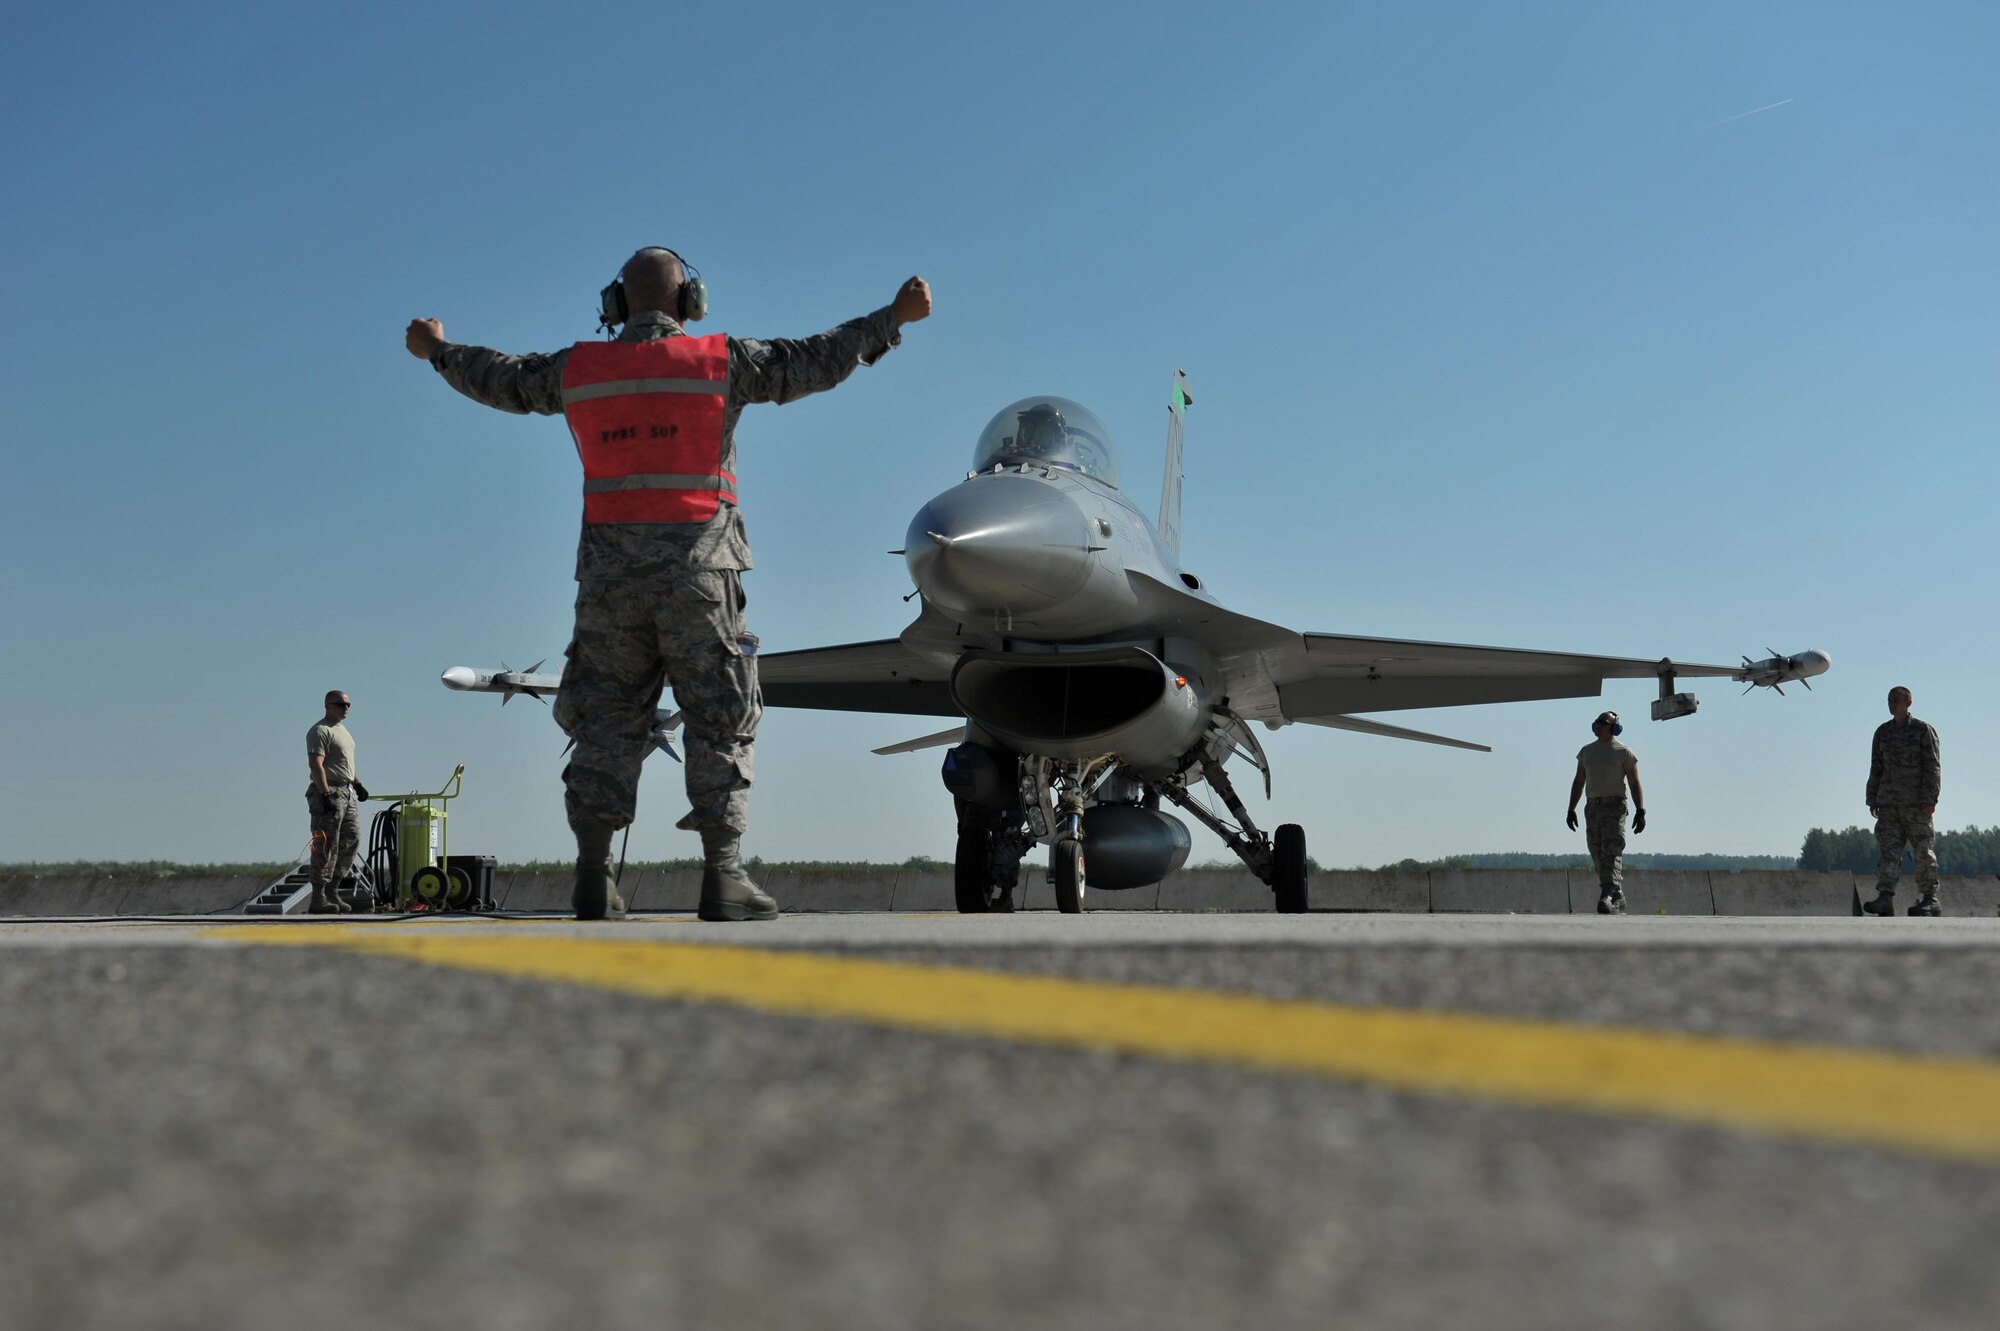 Master Sgt. Joe Ray, a weapons loader assigned to the 180th Fighter Wing, monitors a final preflight safety check on an F-16 Fighting Falcon, May 29, 2017 at Kecskemet Air Base in Hungary. Approximately 150 Airmen and eight F-16 fighter jets from the 180FW traveled to the air base to participate in Load Diffuser 17, a two-week Hungarian-led multinational exercise focused on enhancing interoperability capabilities and skills among NATO allied and European partner air forces by conducting joint operations and air defenses to maintain joint readiness, while also bolstering relationships within the U.S. Air National Guard’s State Partnership Program initiatives. Ohio became state partners with Hungary in 1993. Air National Guard photo by Senior Master Sgt. Beth Holliker.